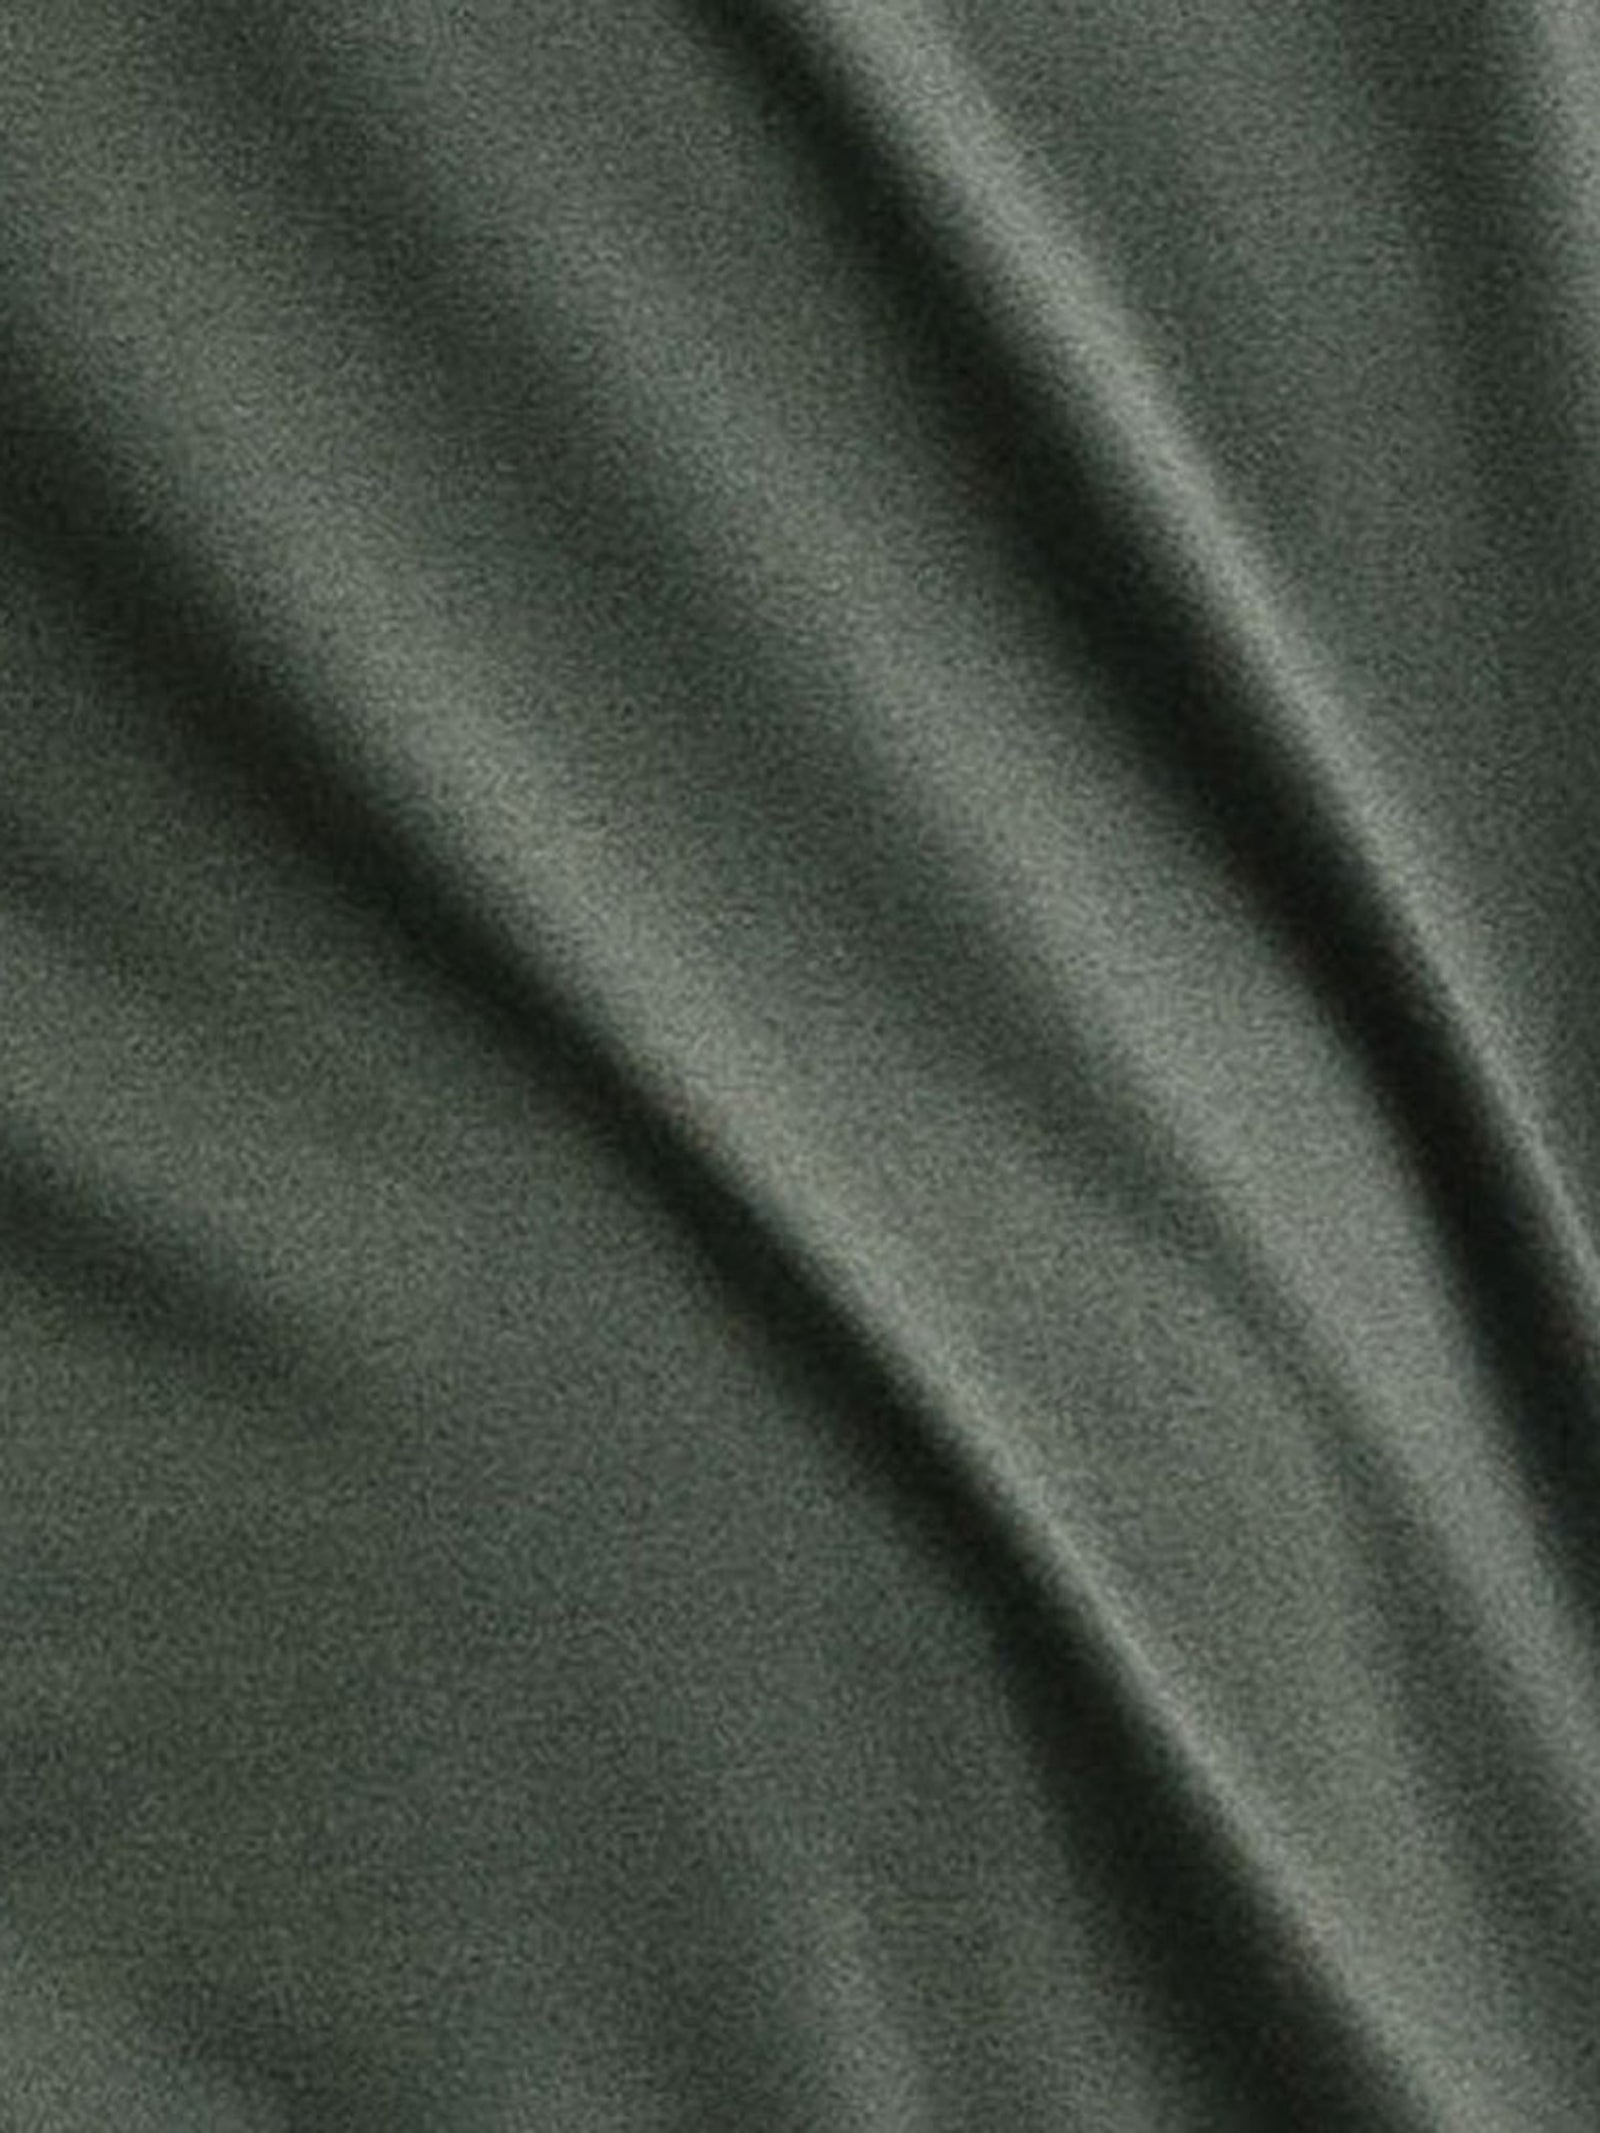 Olive Men's Stretch-Knit Bamboo Lounge Tee. The photo is taken close up so as to better show the texture of the material.